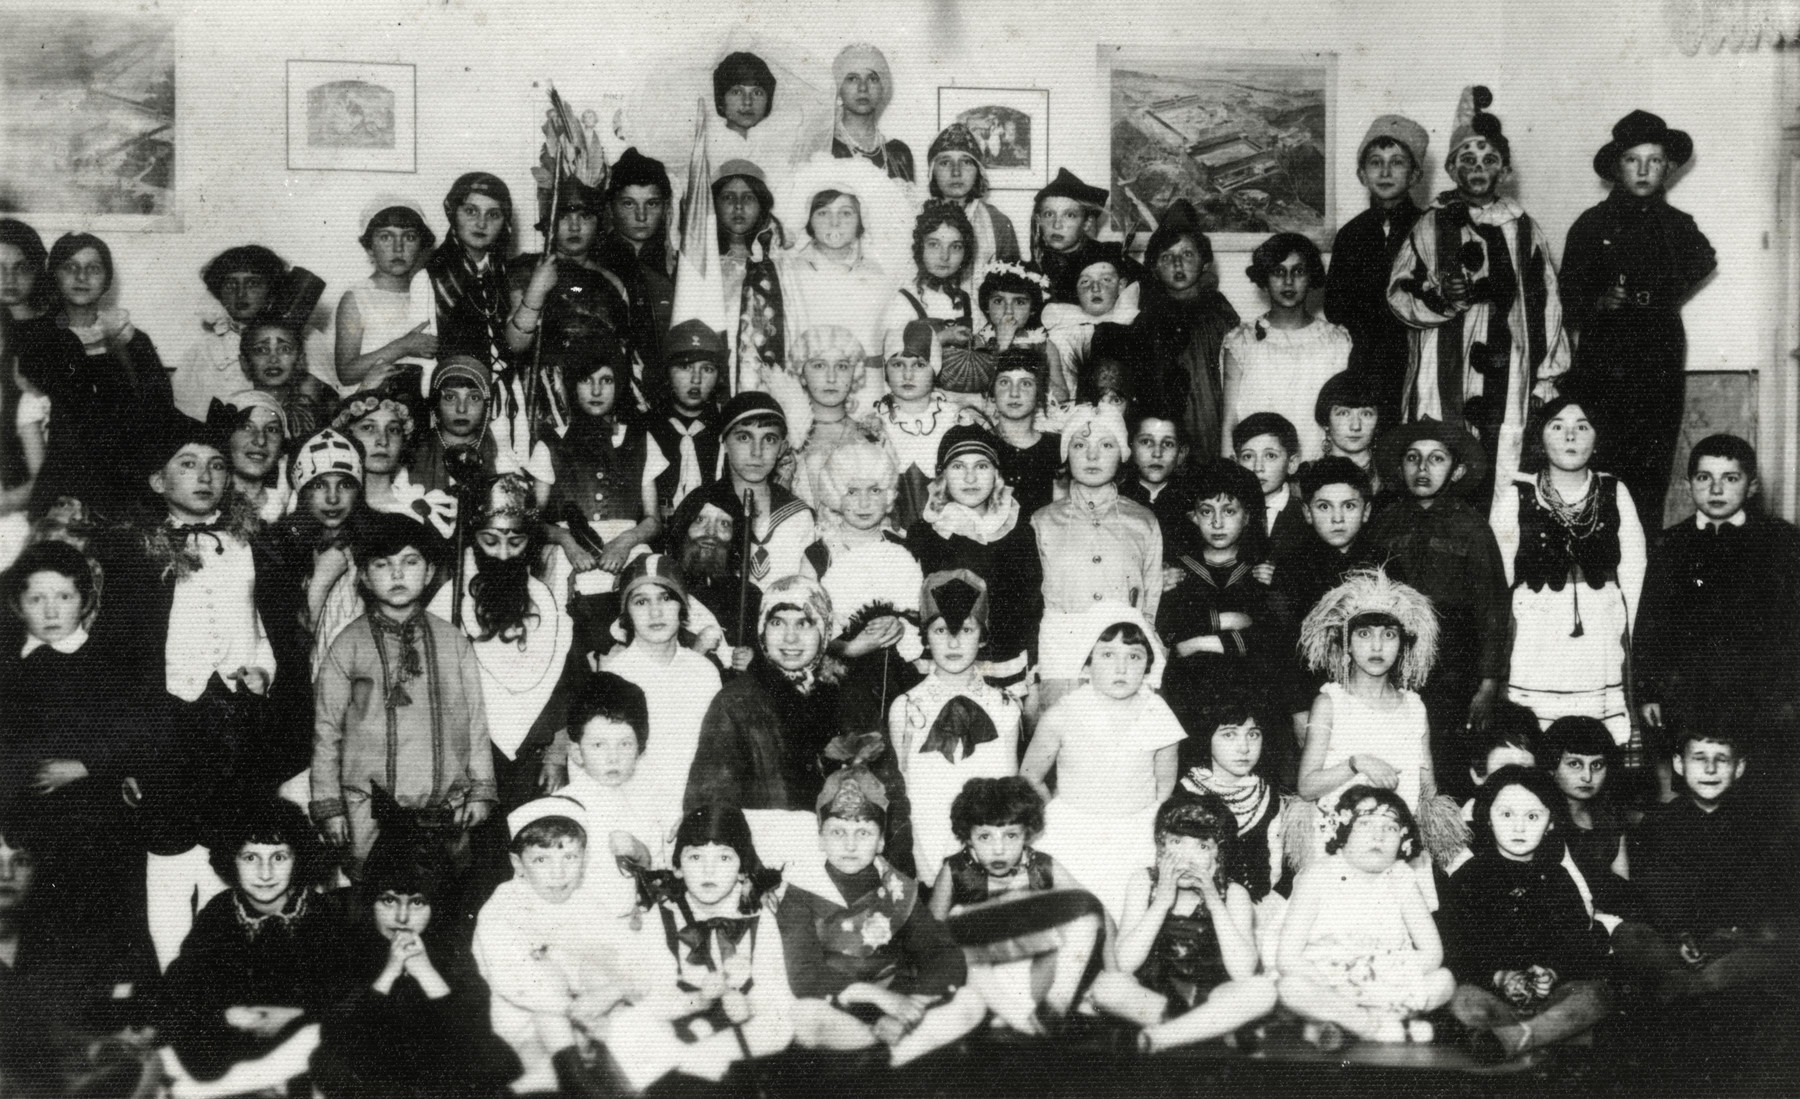 Children in the Humanistic school in Lublin, Poland pose for a group portrait in their Purim costumes.

Among those pictured is Yocheved Fryd dressed as Rebecca in a head scarf.